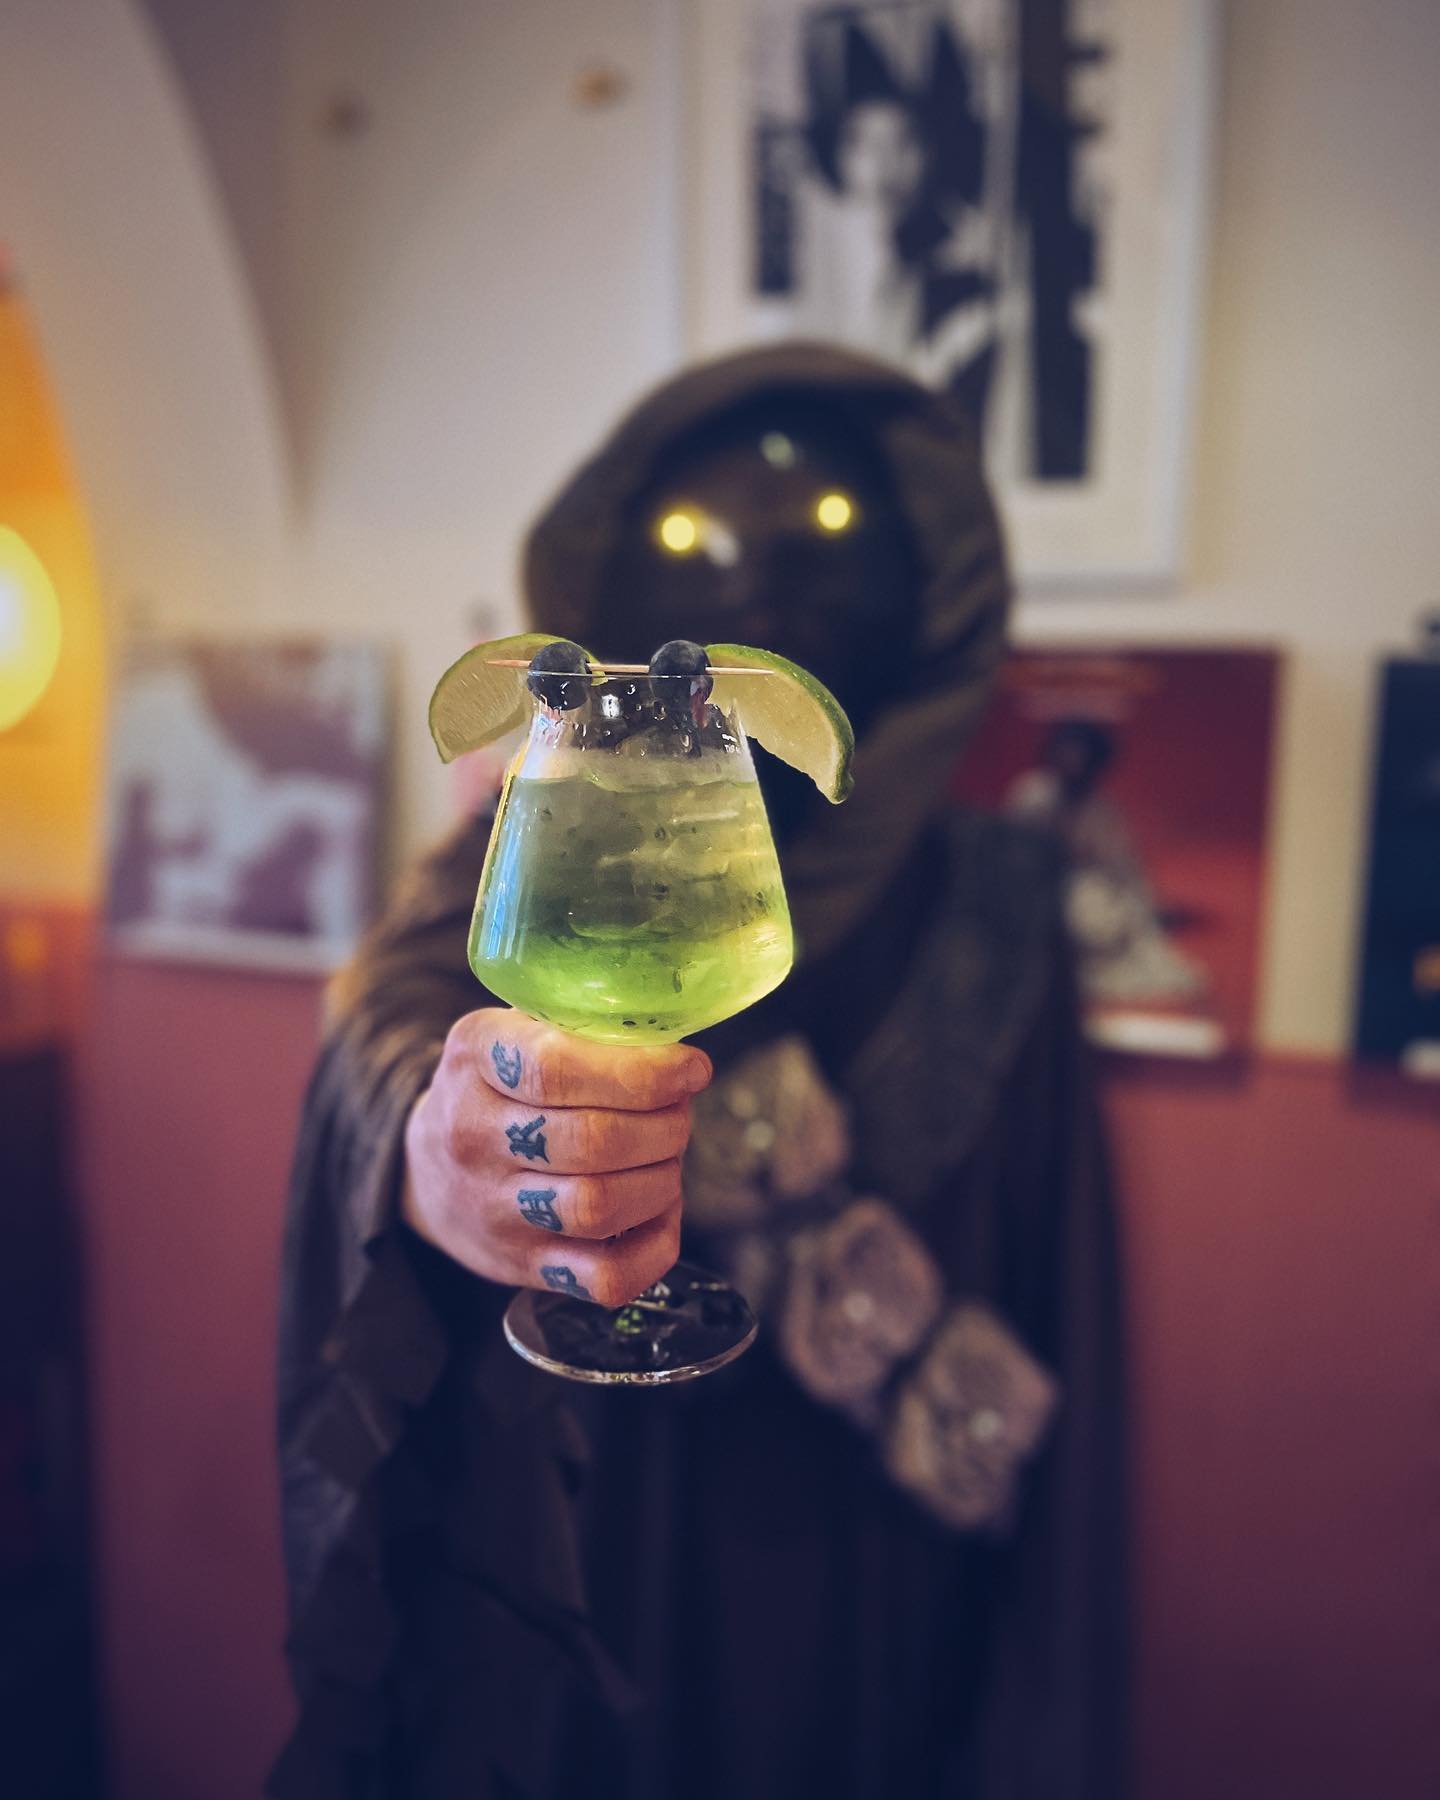 May The Fourth be with you&hellip;BOY OH BOY we are getting over excited&hellip;!!
 
Star Wars cocktails on the specials this weekend, 8 imperial stouts from @emperorsbrewery inc 3 exclusive first pours brewed especially, inc an epic collab with @ner